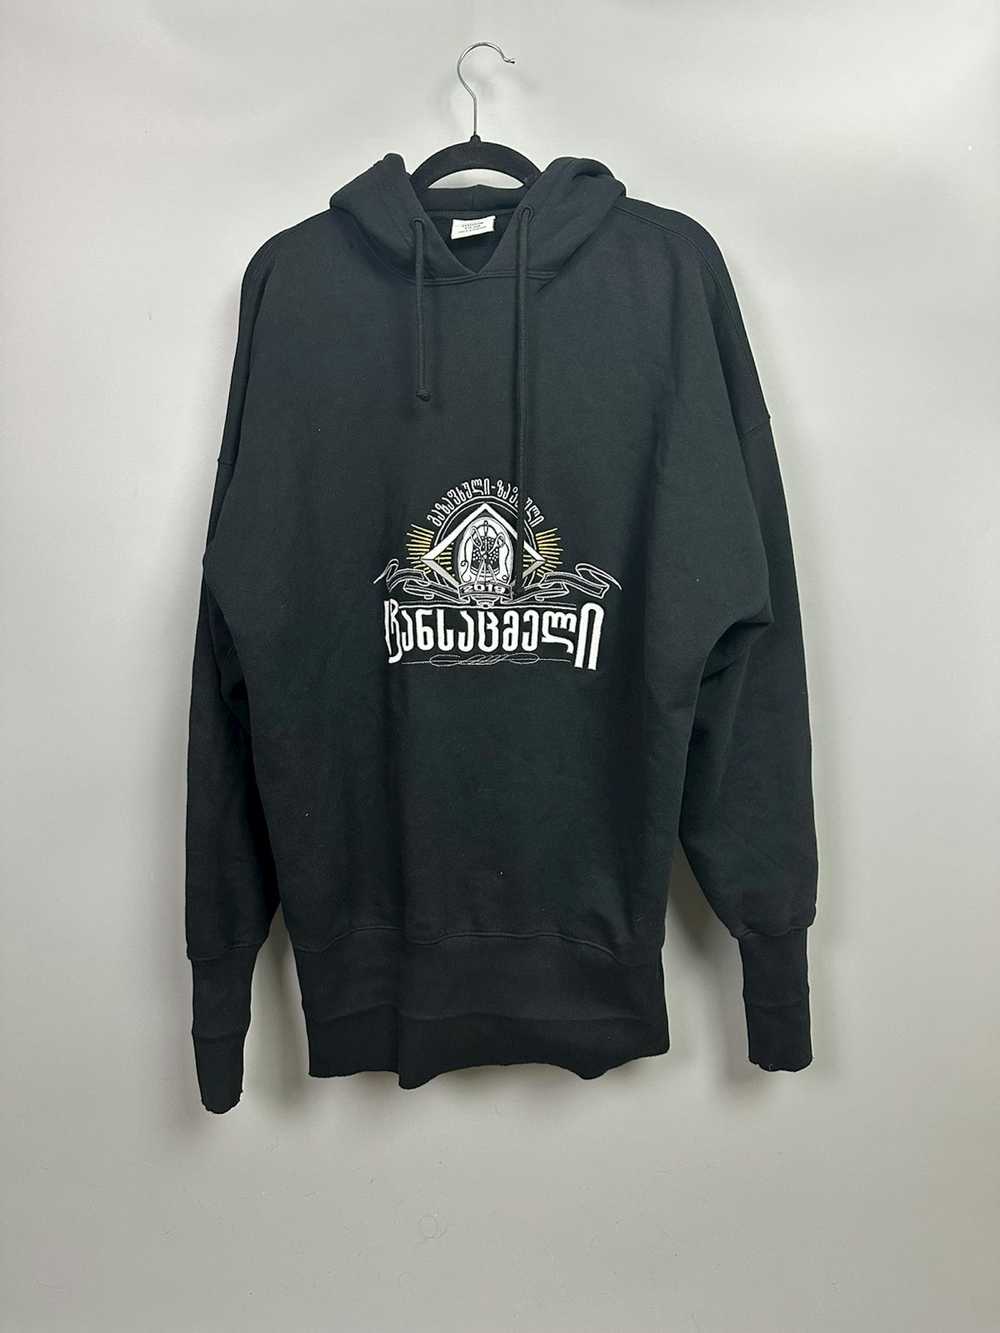 Vetements SS19 Secret Society Pullover Hoodie - image 1